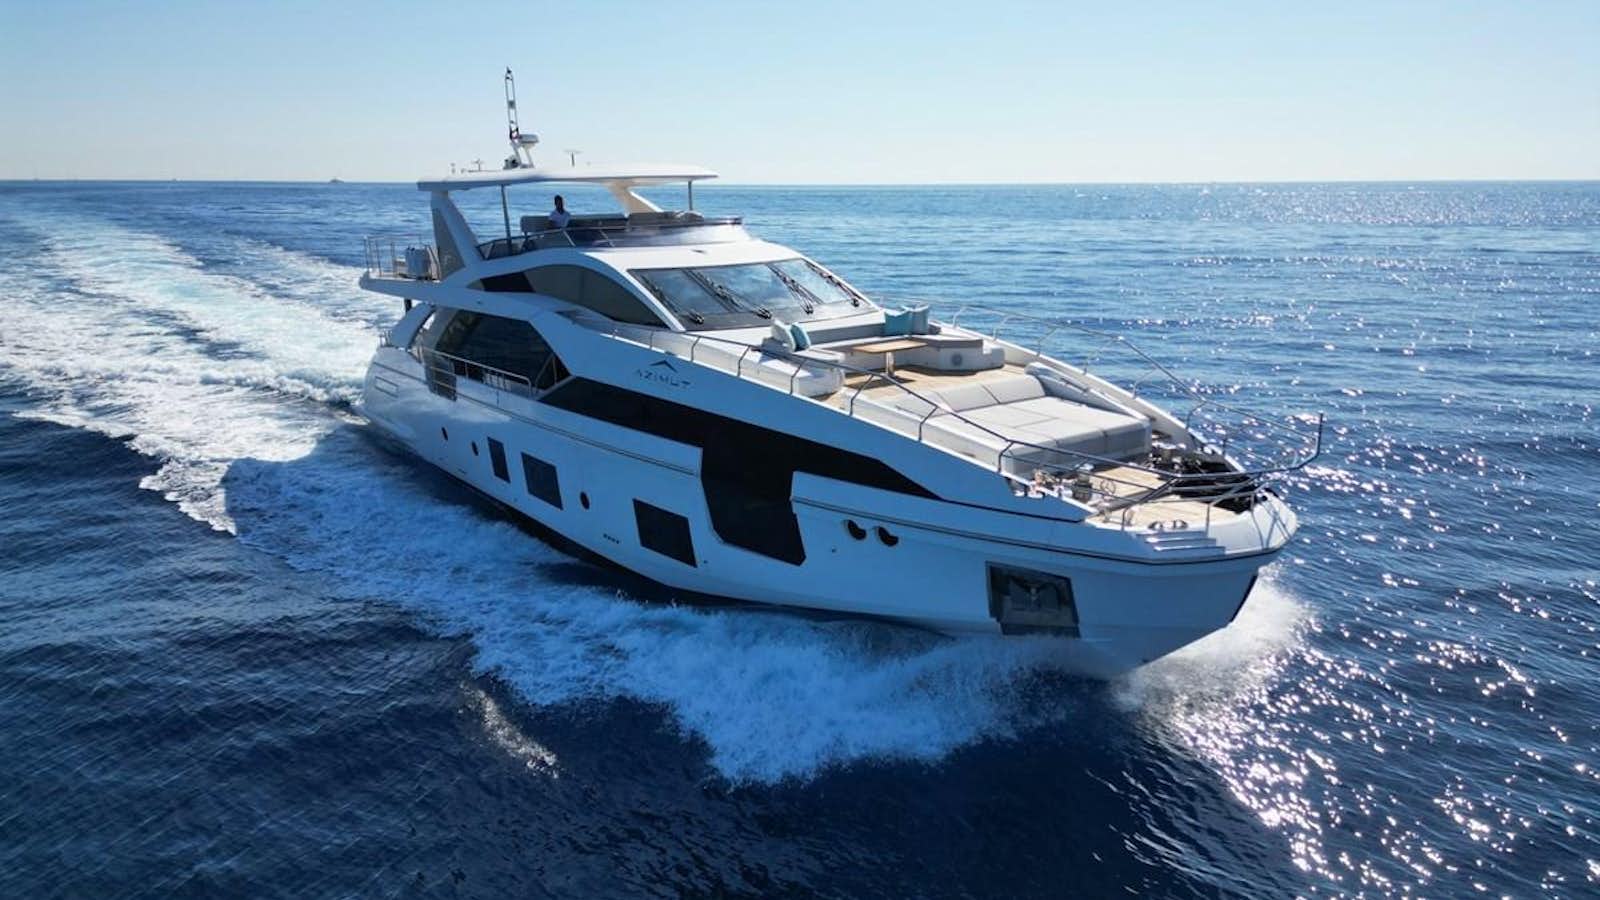 Grande 27m
Yacht for Sale